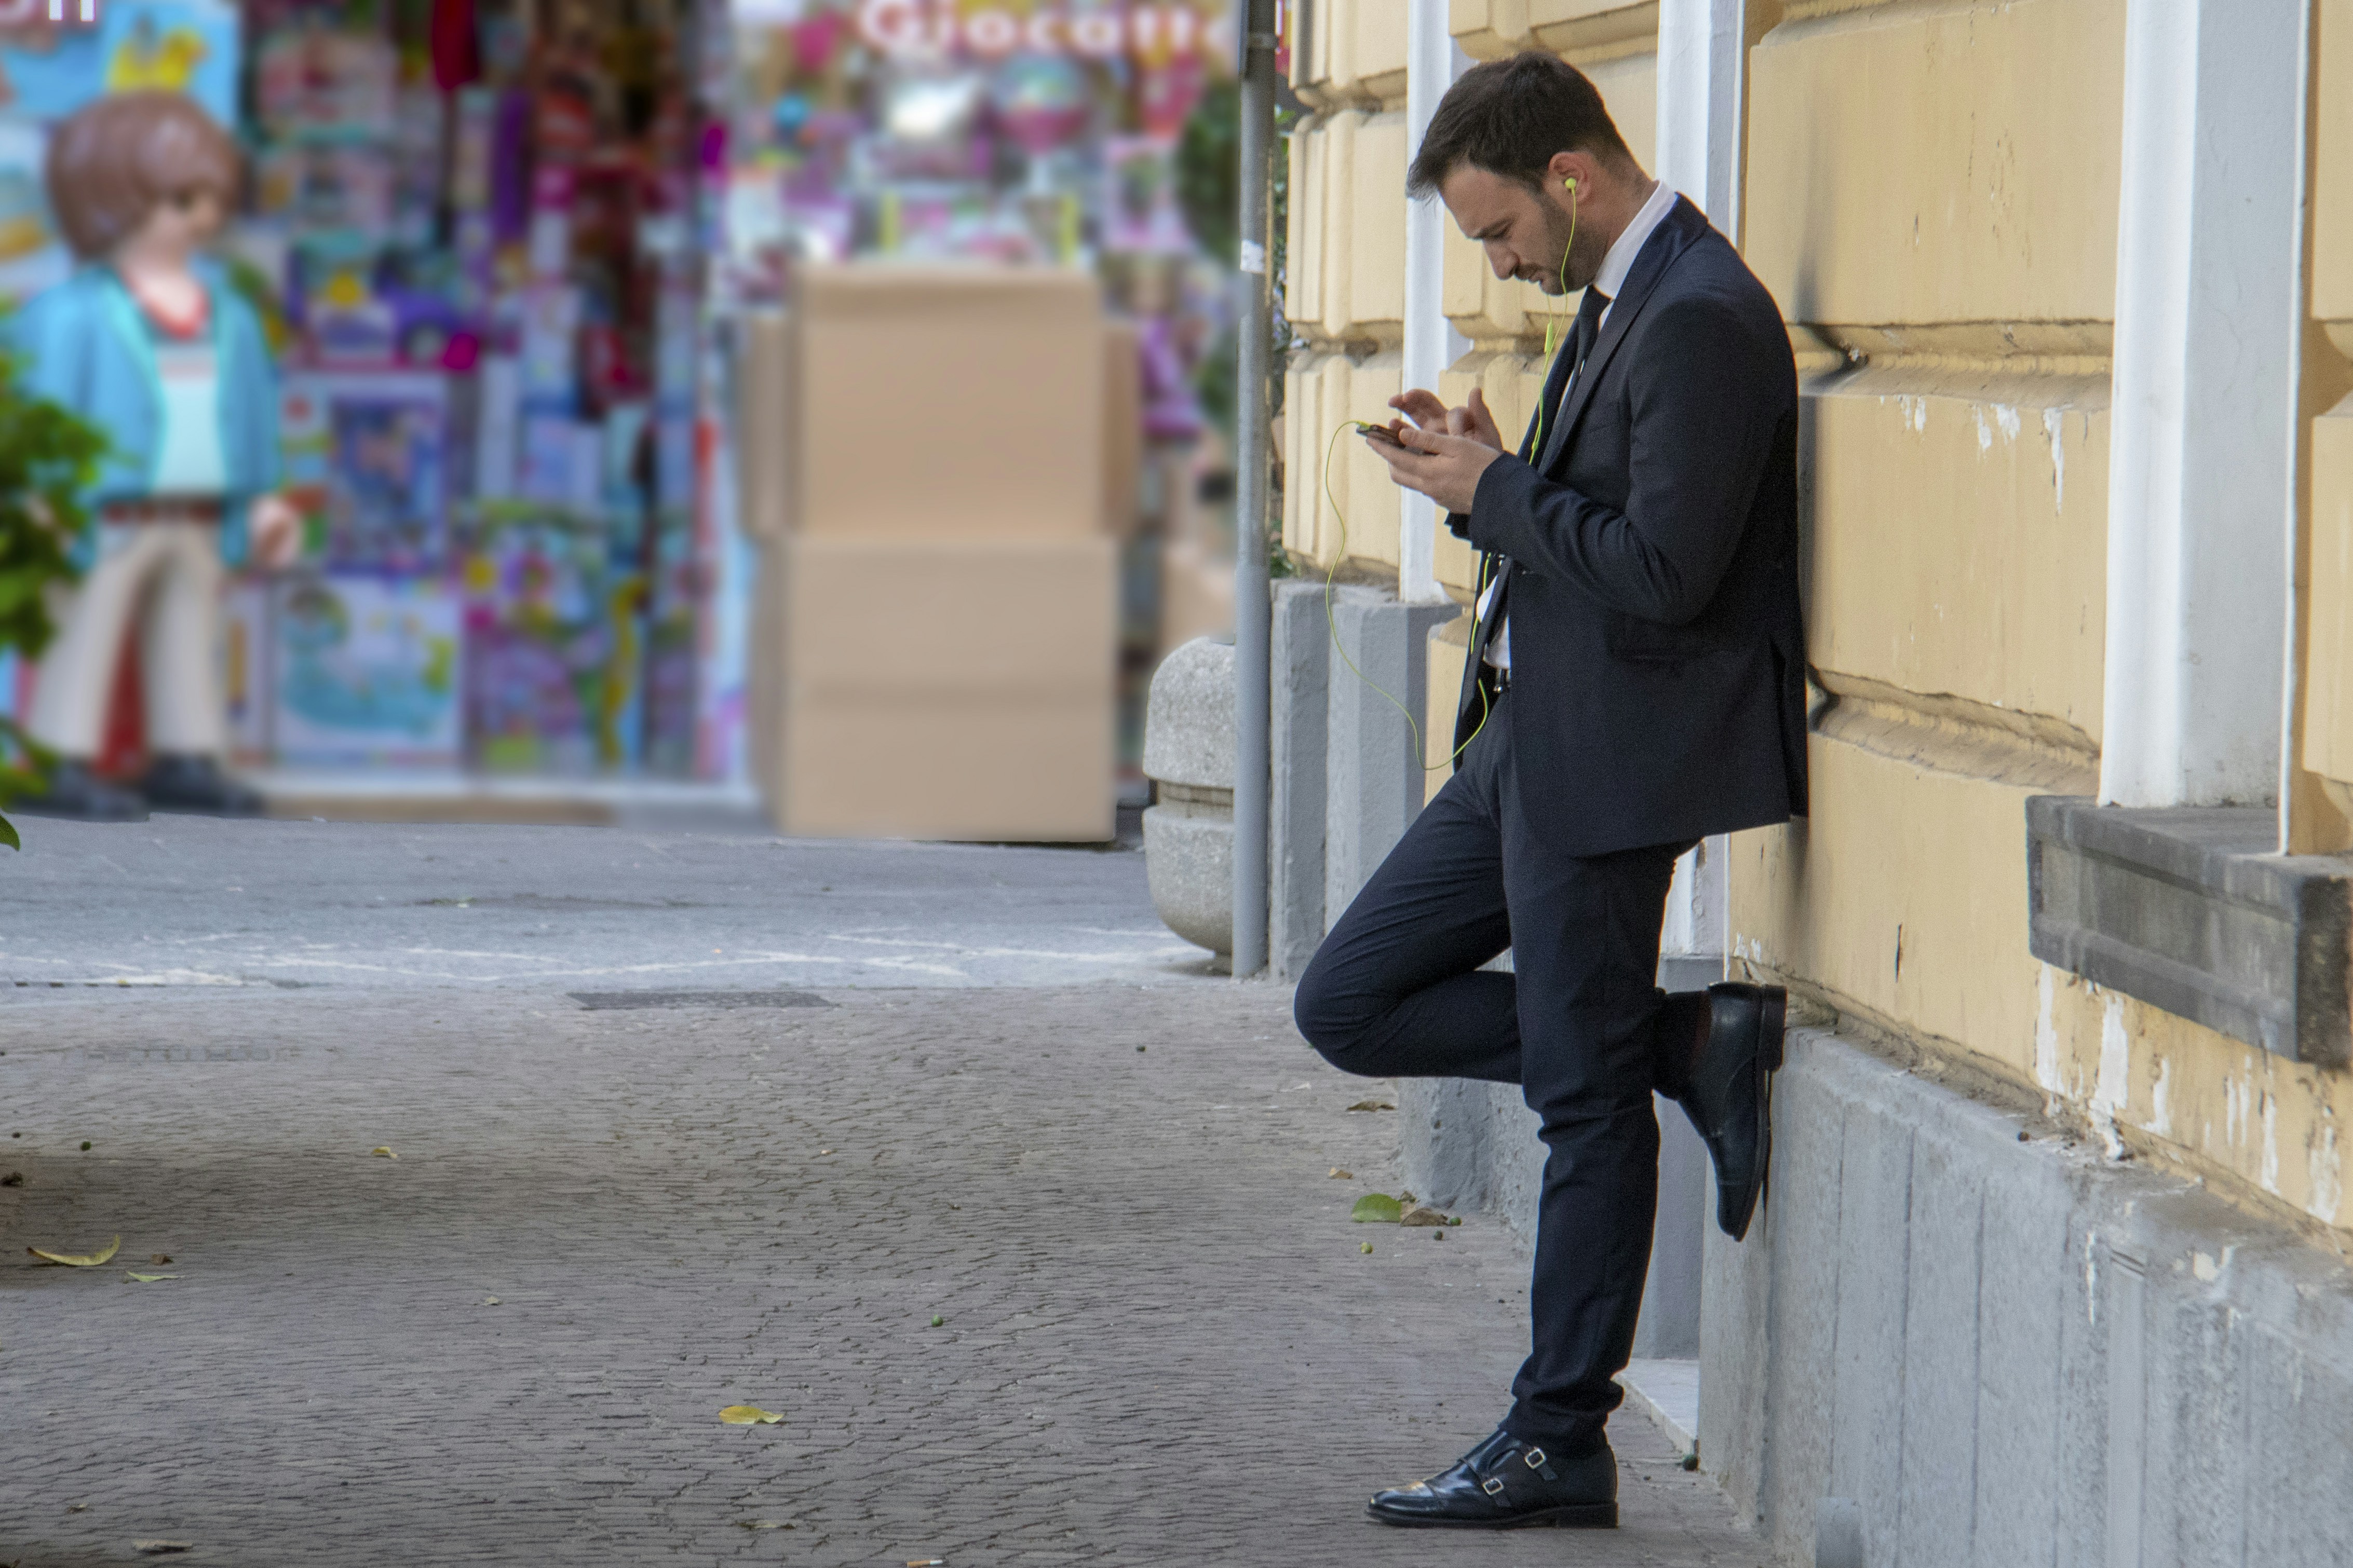 I was in Sorrento on vacation and noticed the young businessman down a side street, checking his mobile phone or indeed, choosing the next music track to listen to. I just liked the look of his stance and the fact that he was oblivious to everything around him.